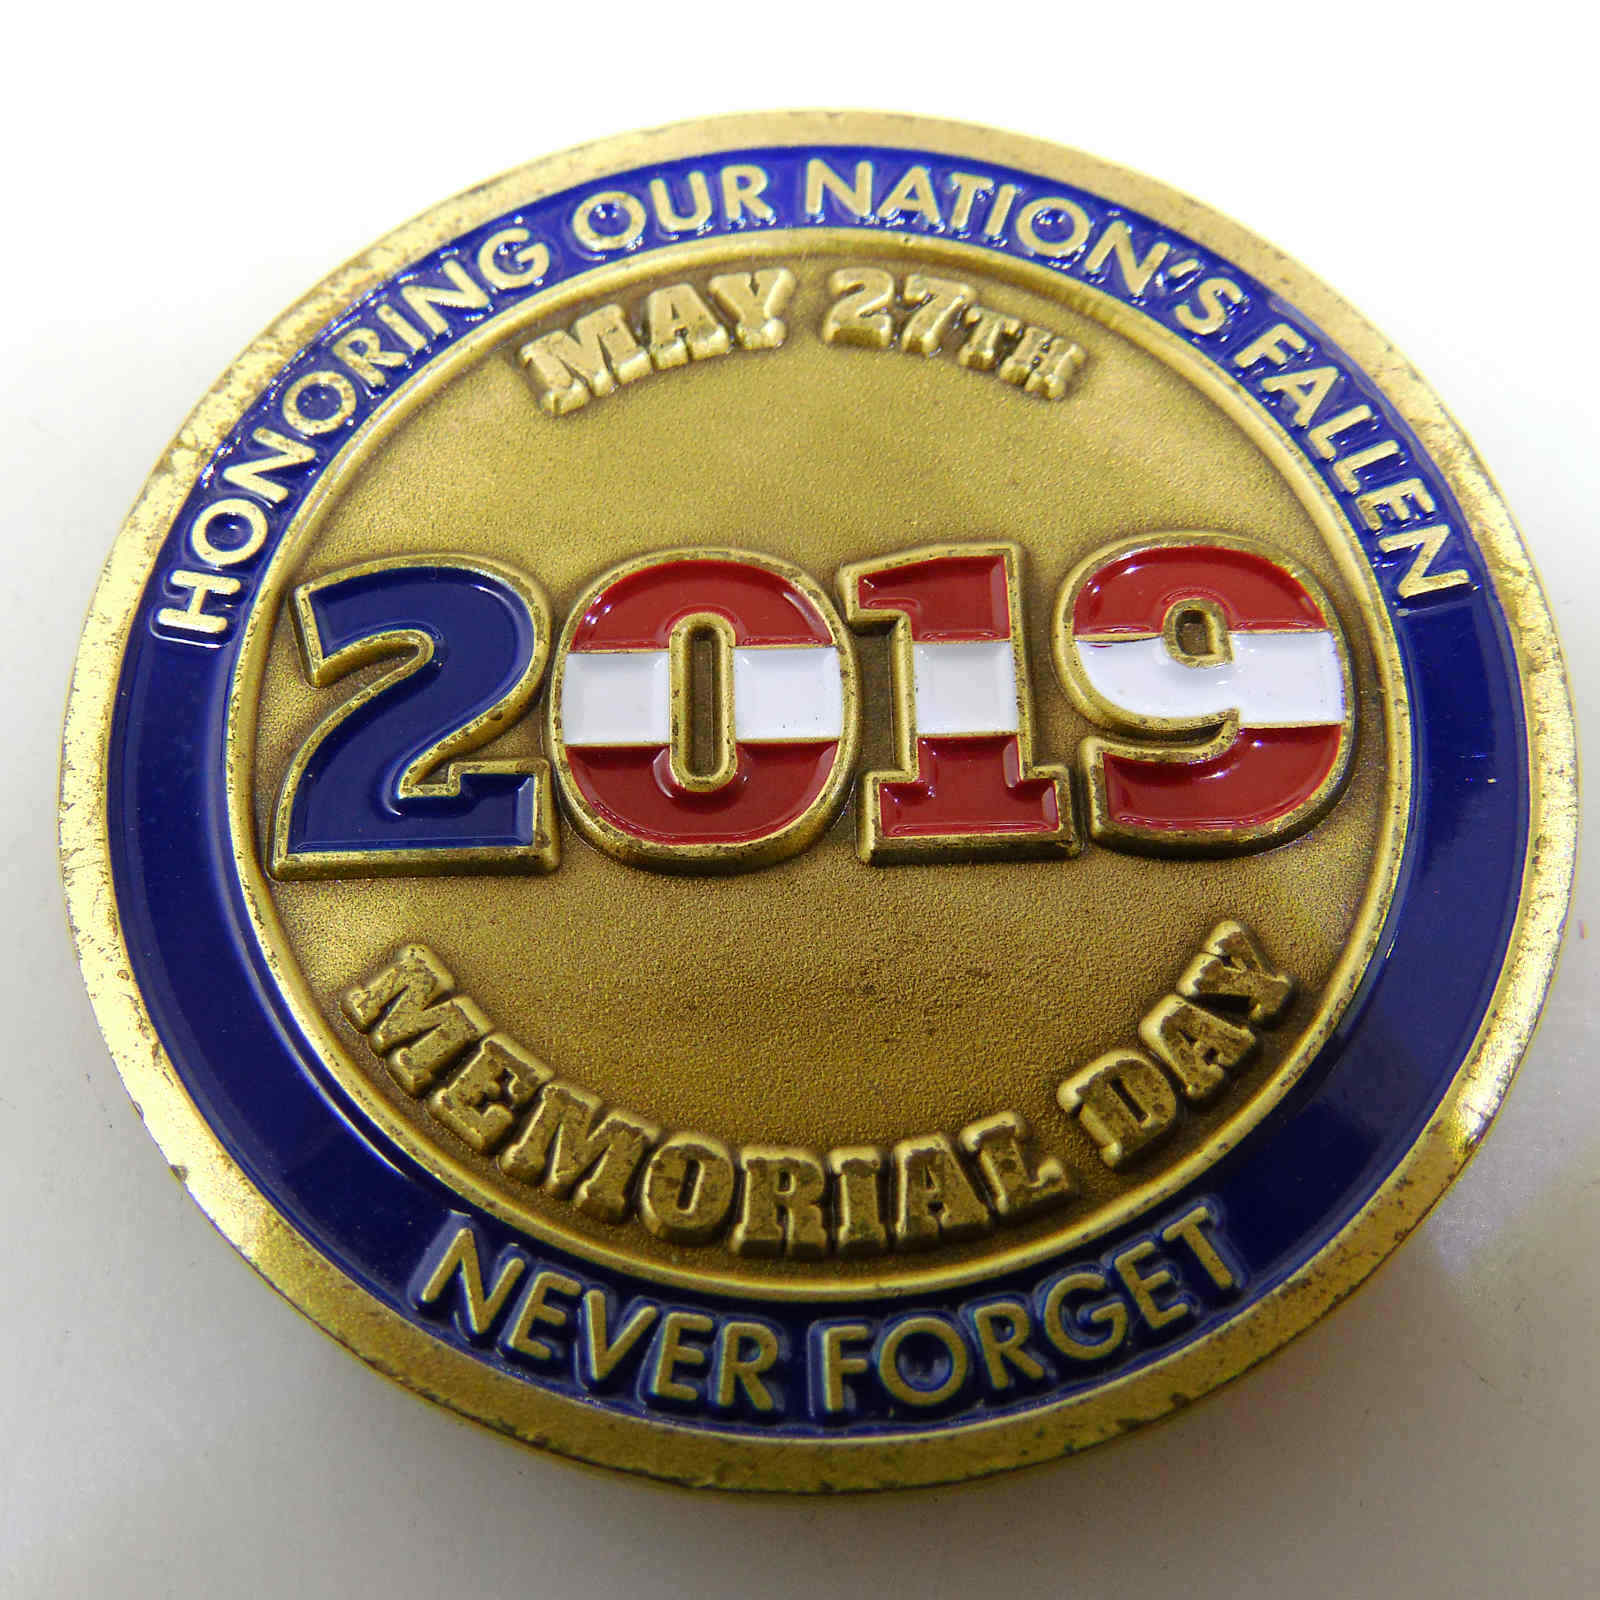 HONORING OUR NATION FALLEN NEVER FORGET CHALLENGE COIN